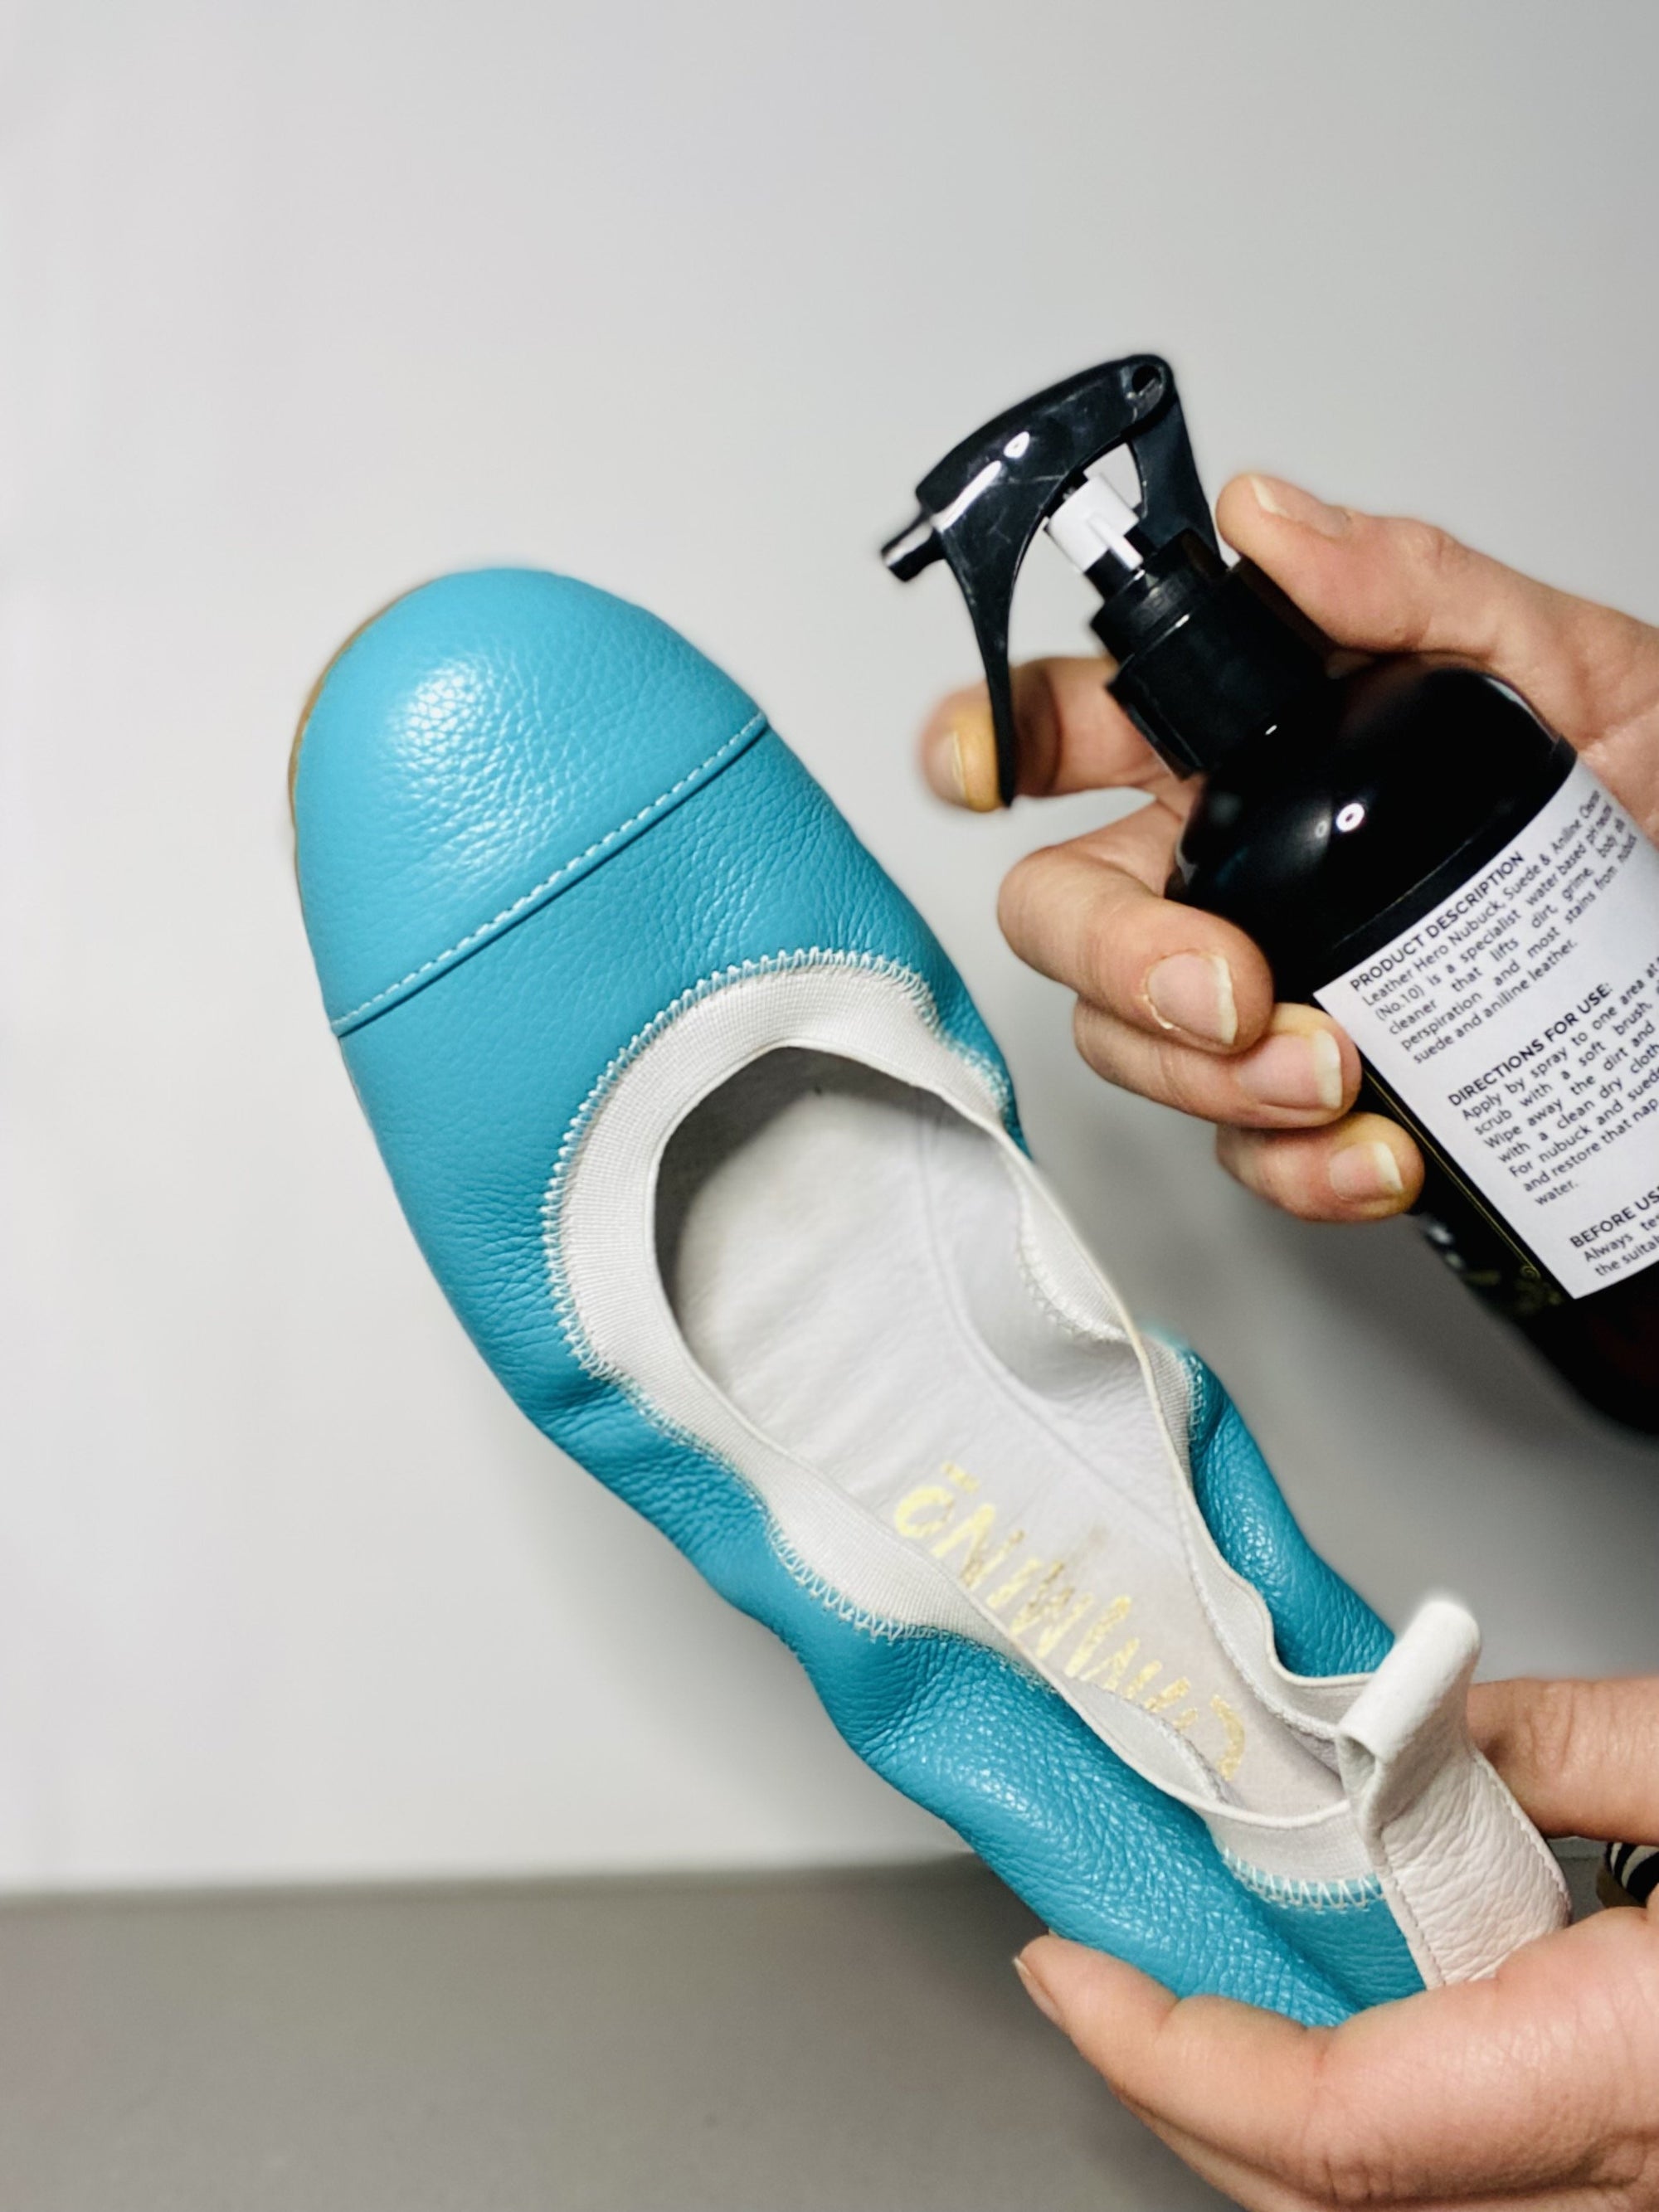 HOW TO CLEAN YOUR LEATHER OR SUEDE SHOES